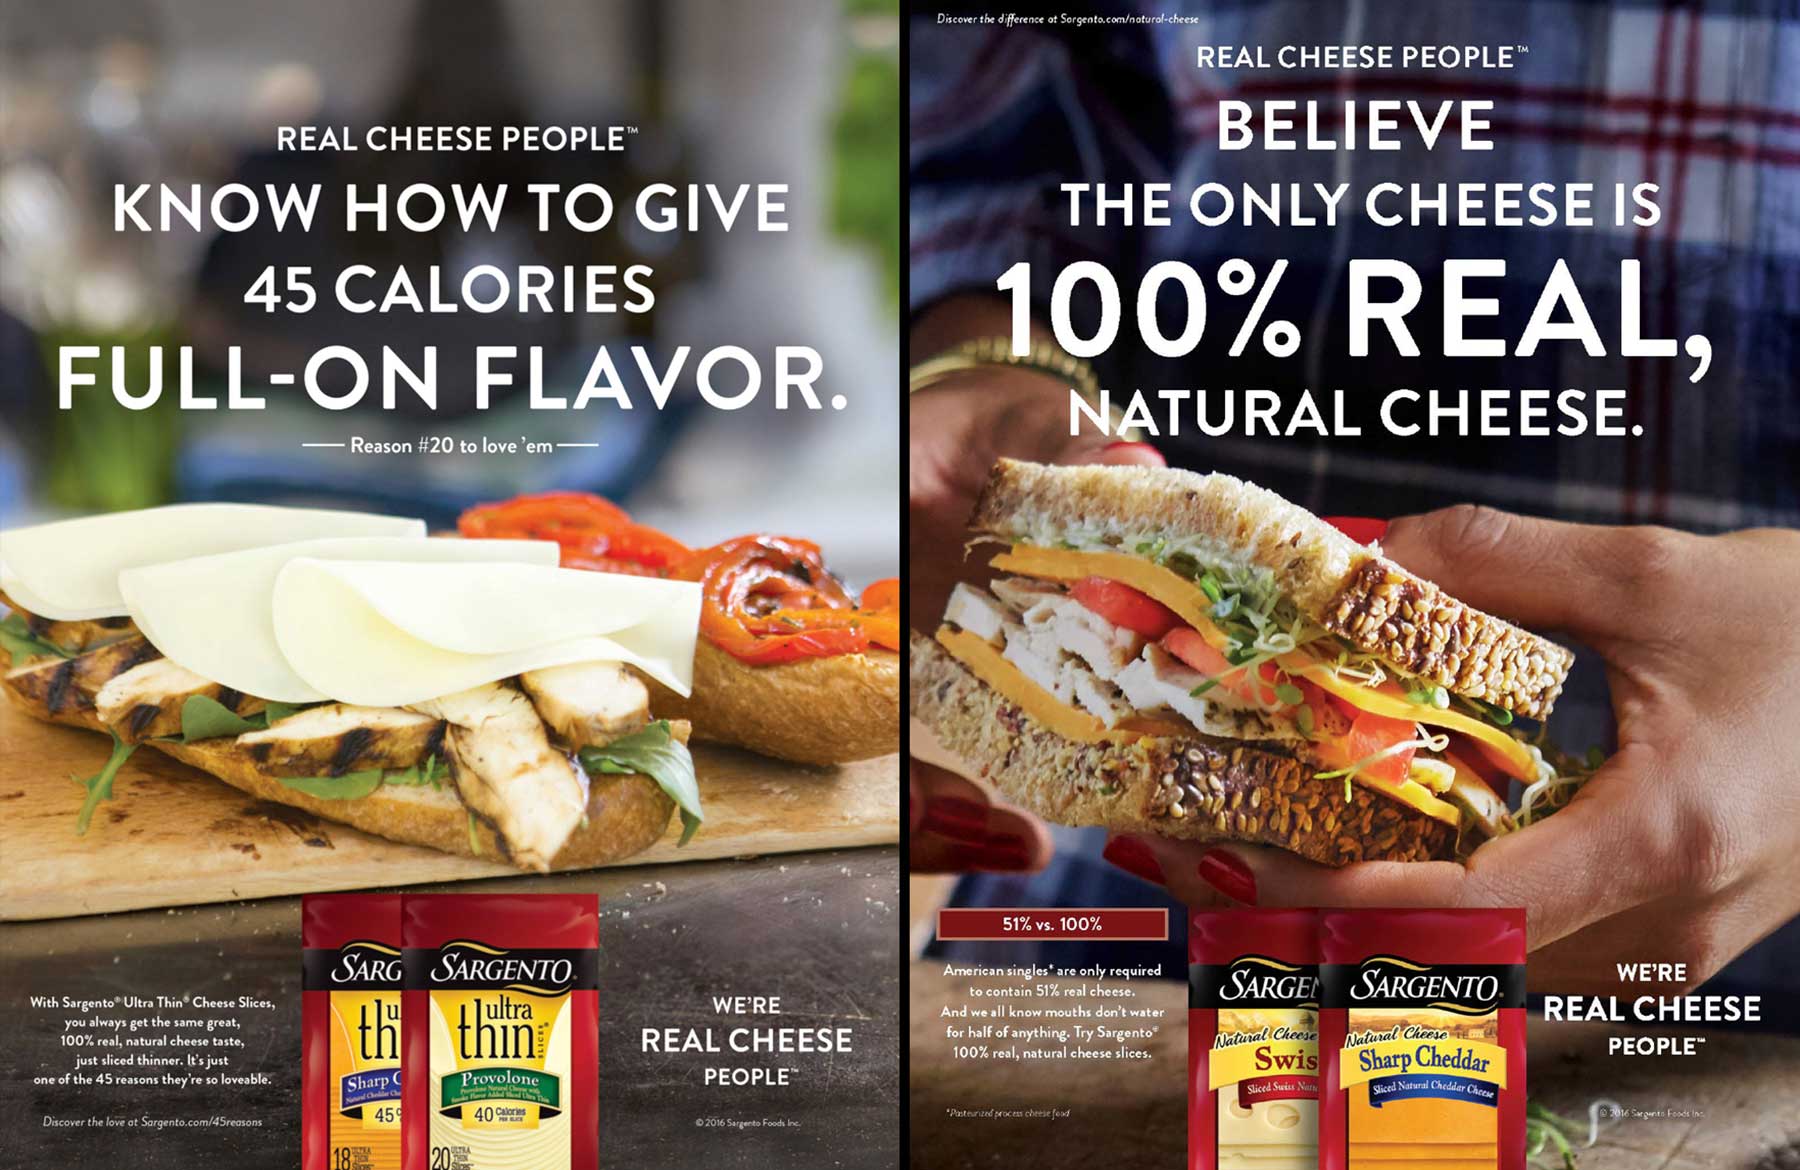 Client: Sargento Cheese
Photographer: Kathryn Barnard
Advertising Agency: Ogilvy & Mather Chicago 
Location: Seattle, Wa